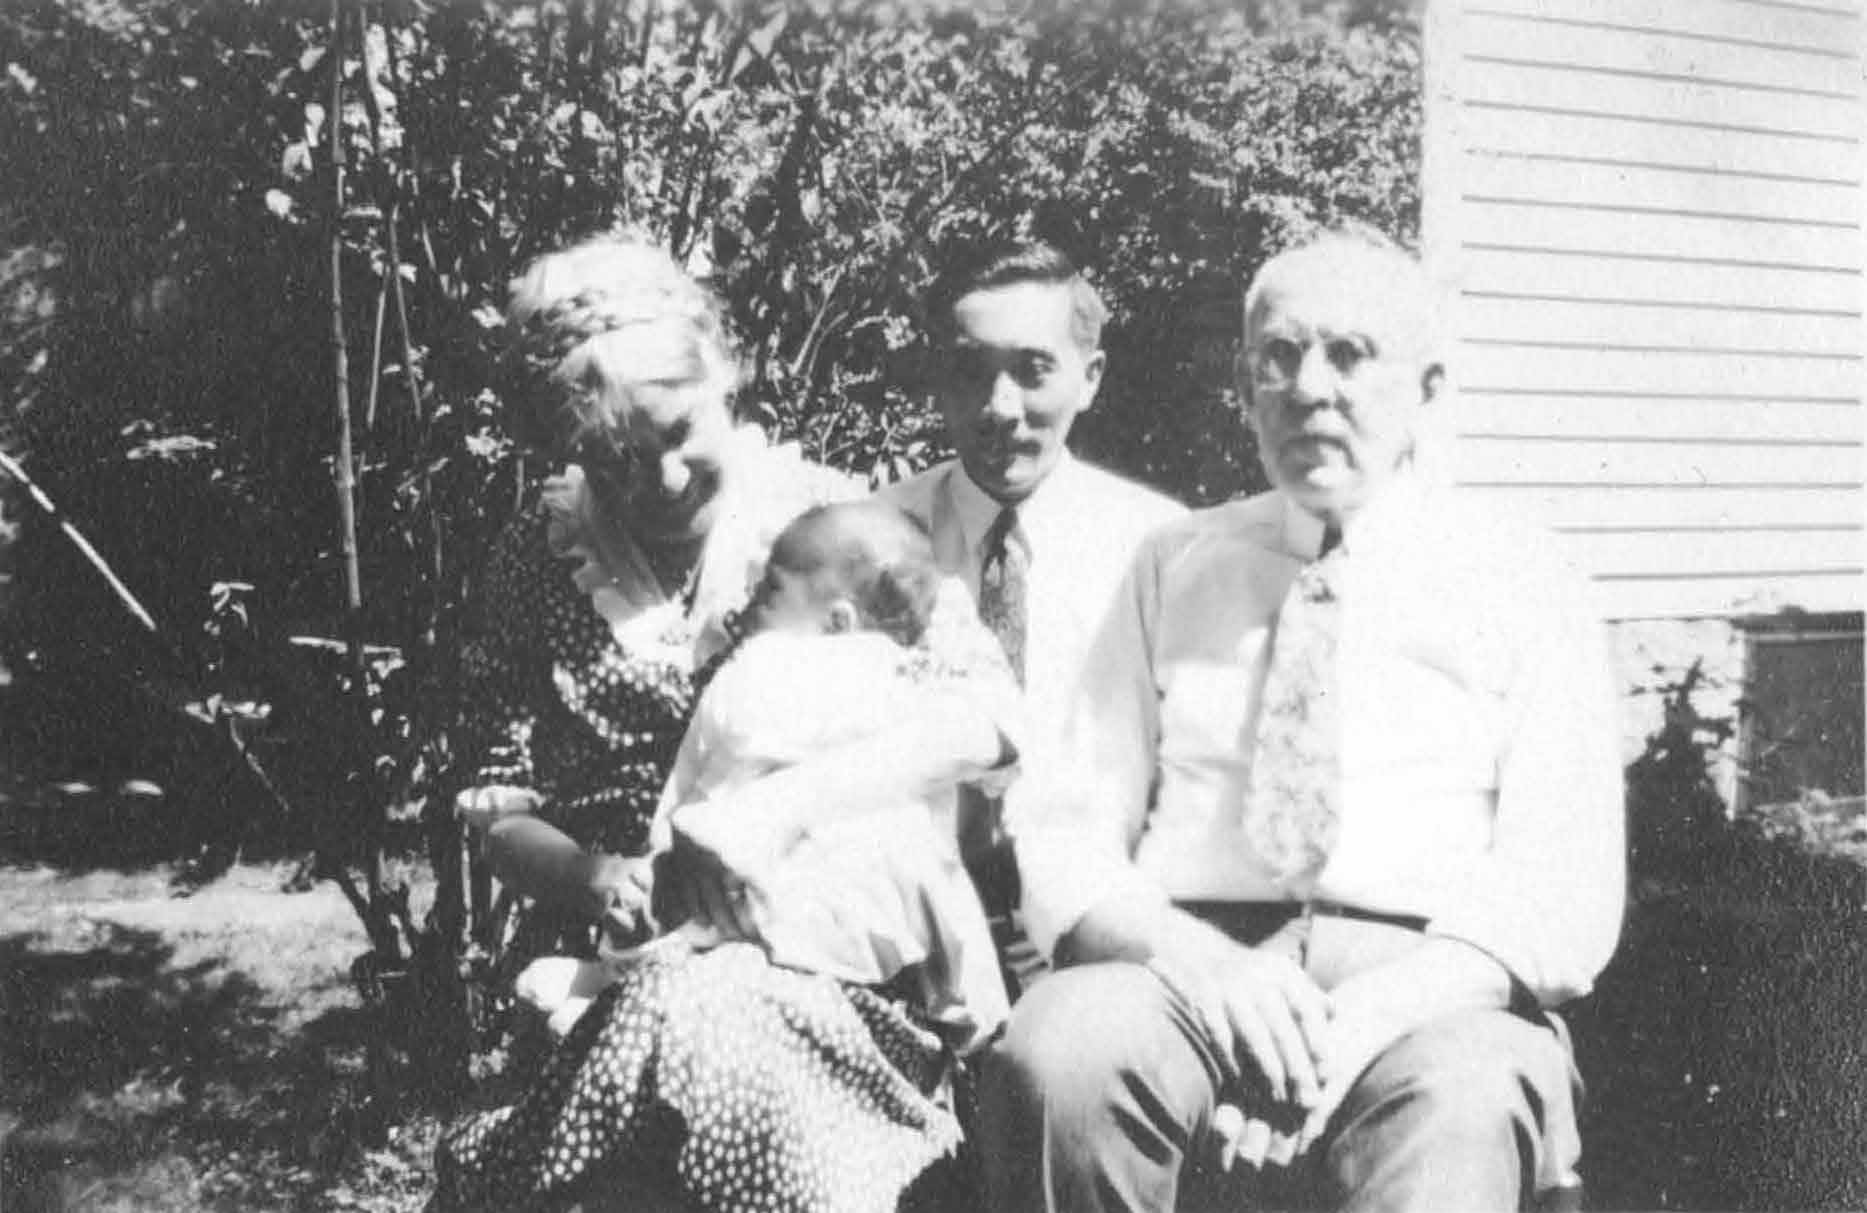 Jim Toy as a baby with his family, 1930.